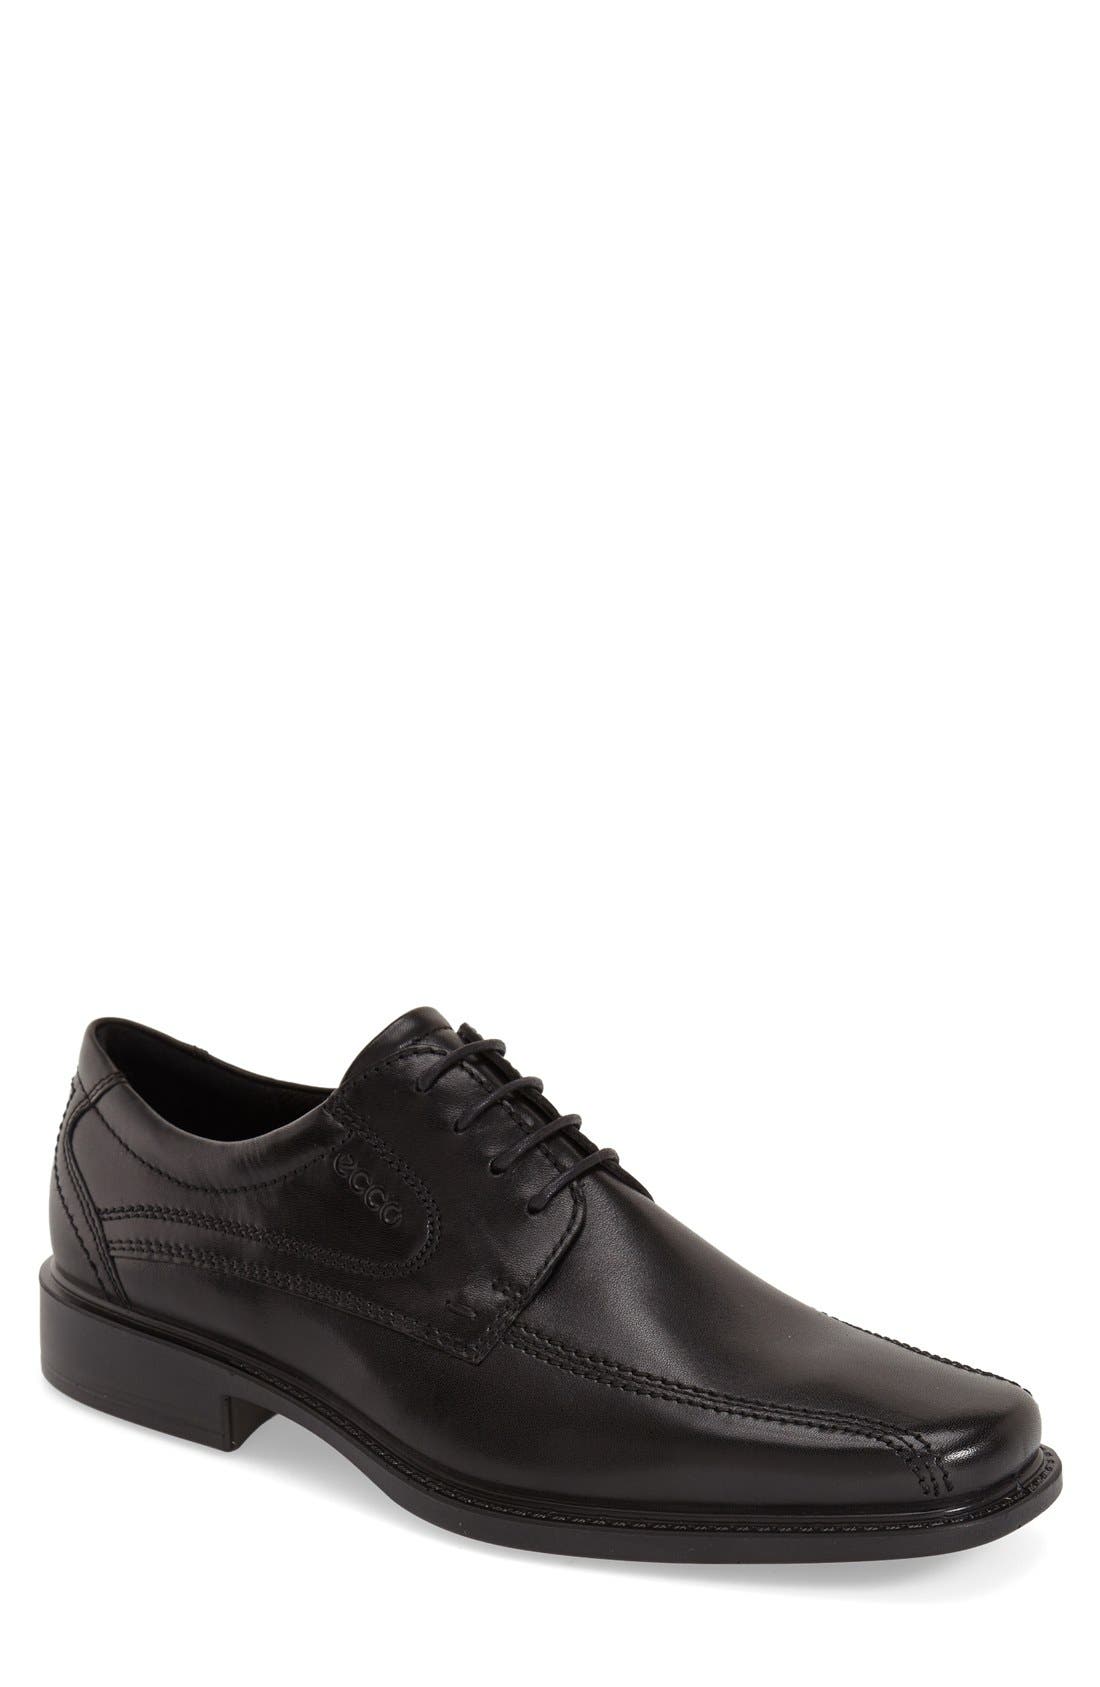 ECCO 'New Jersey' Bicycle Toe Oxford 